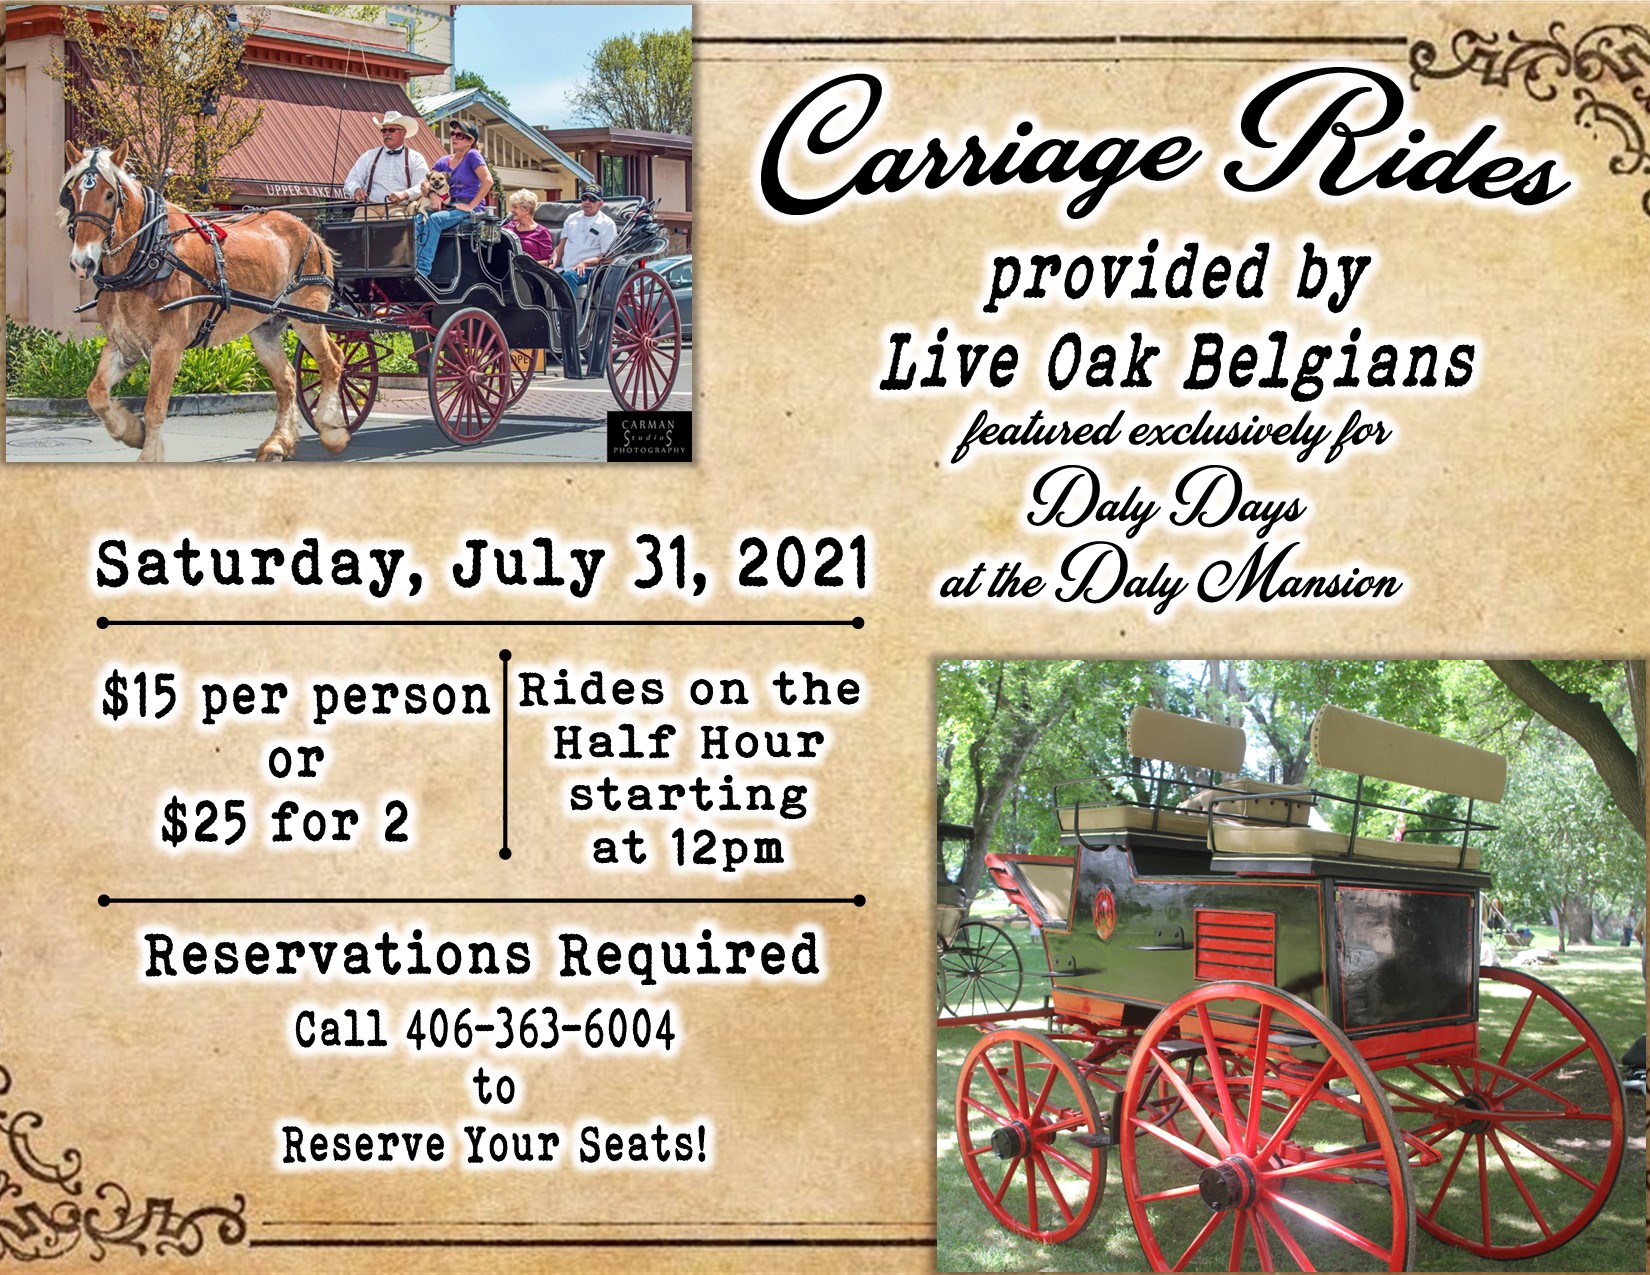 Carriage Rides at Daly Days 2021